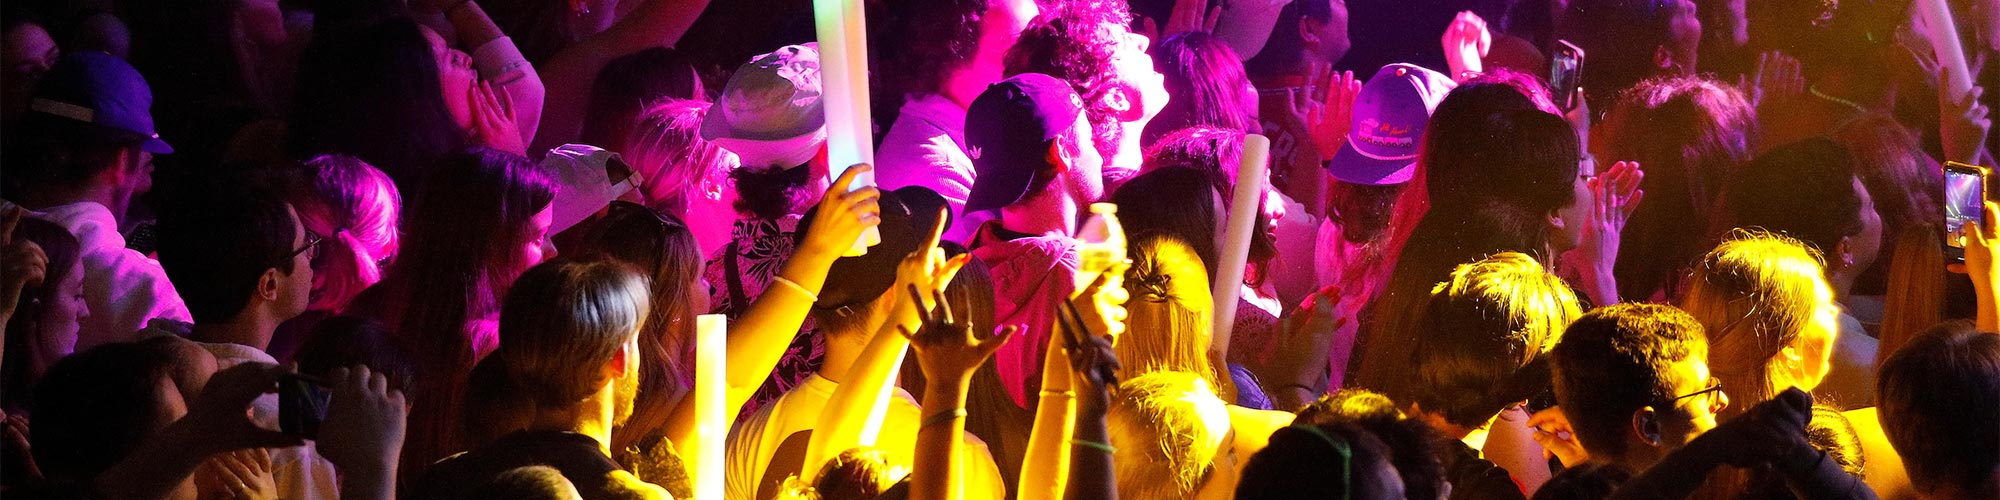 Pink and yellow lights shine on a crowd of concert goers